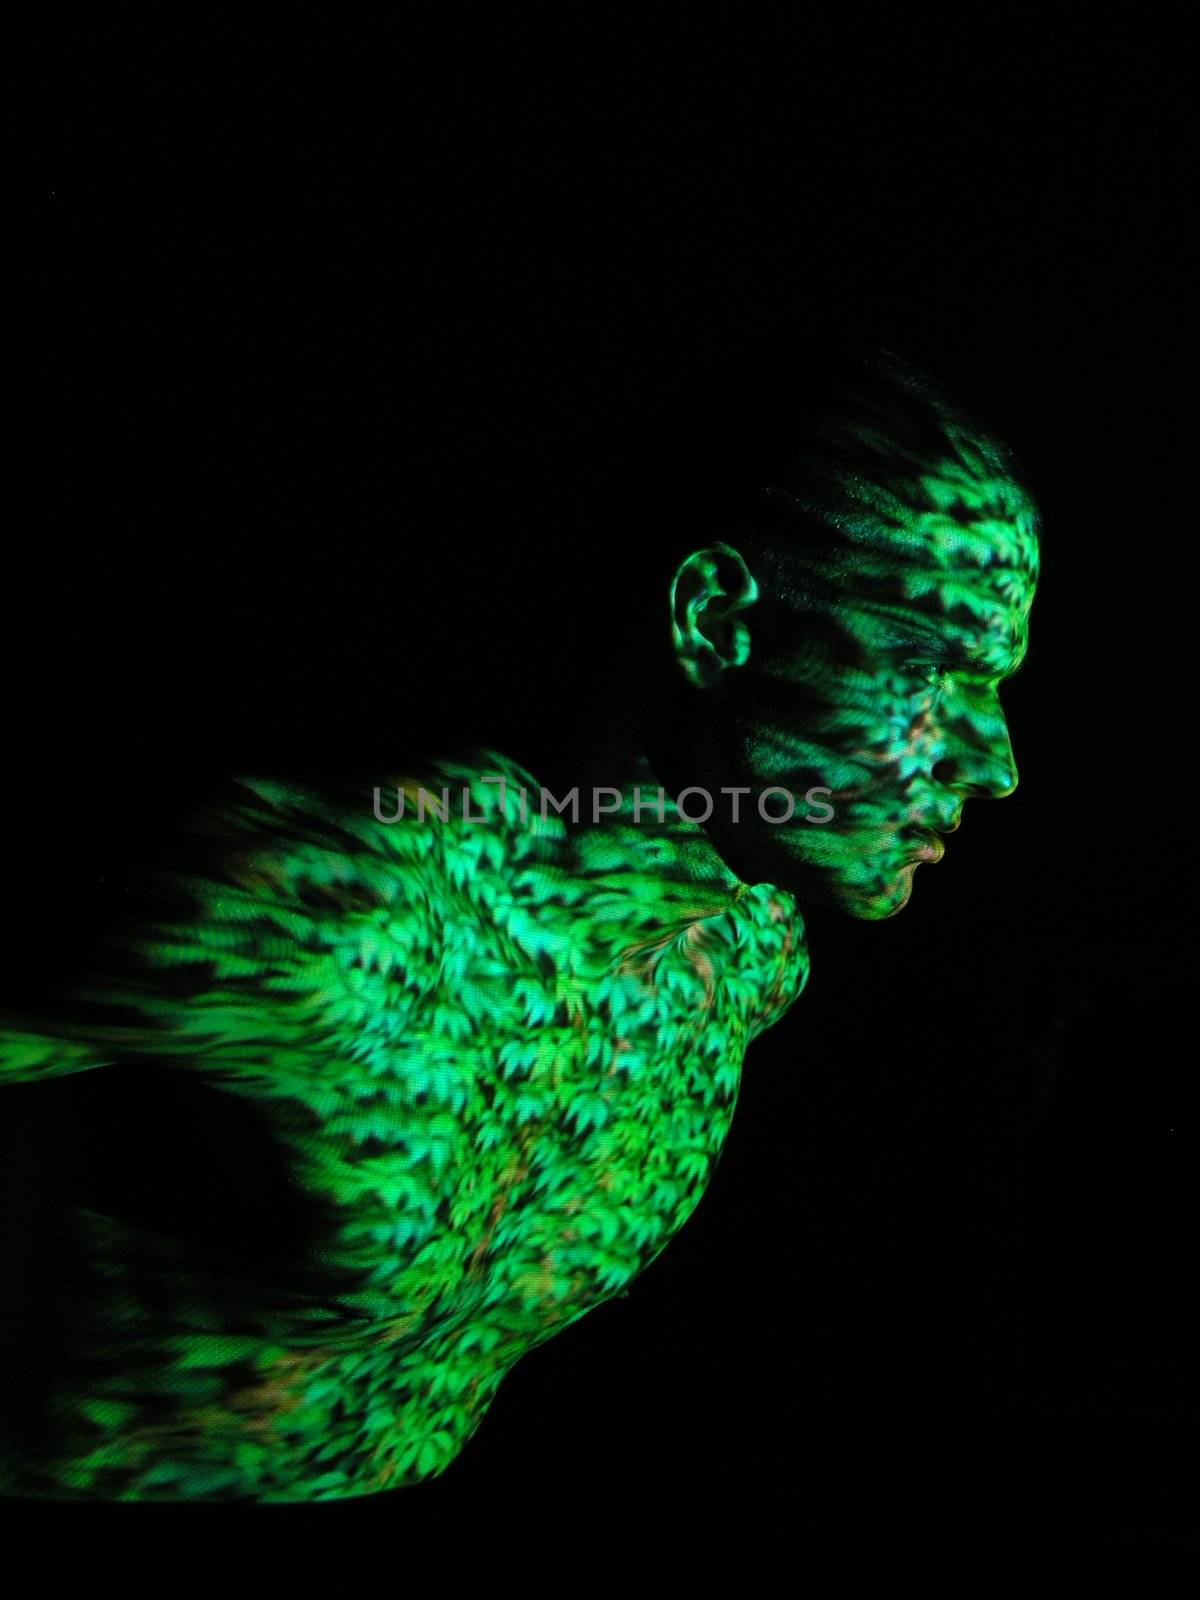 Projection of Leafs Texture on Human Body